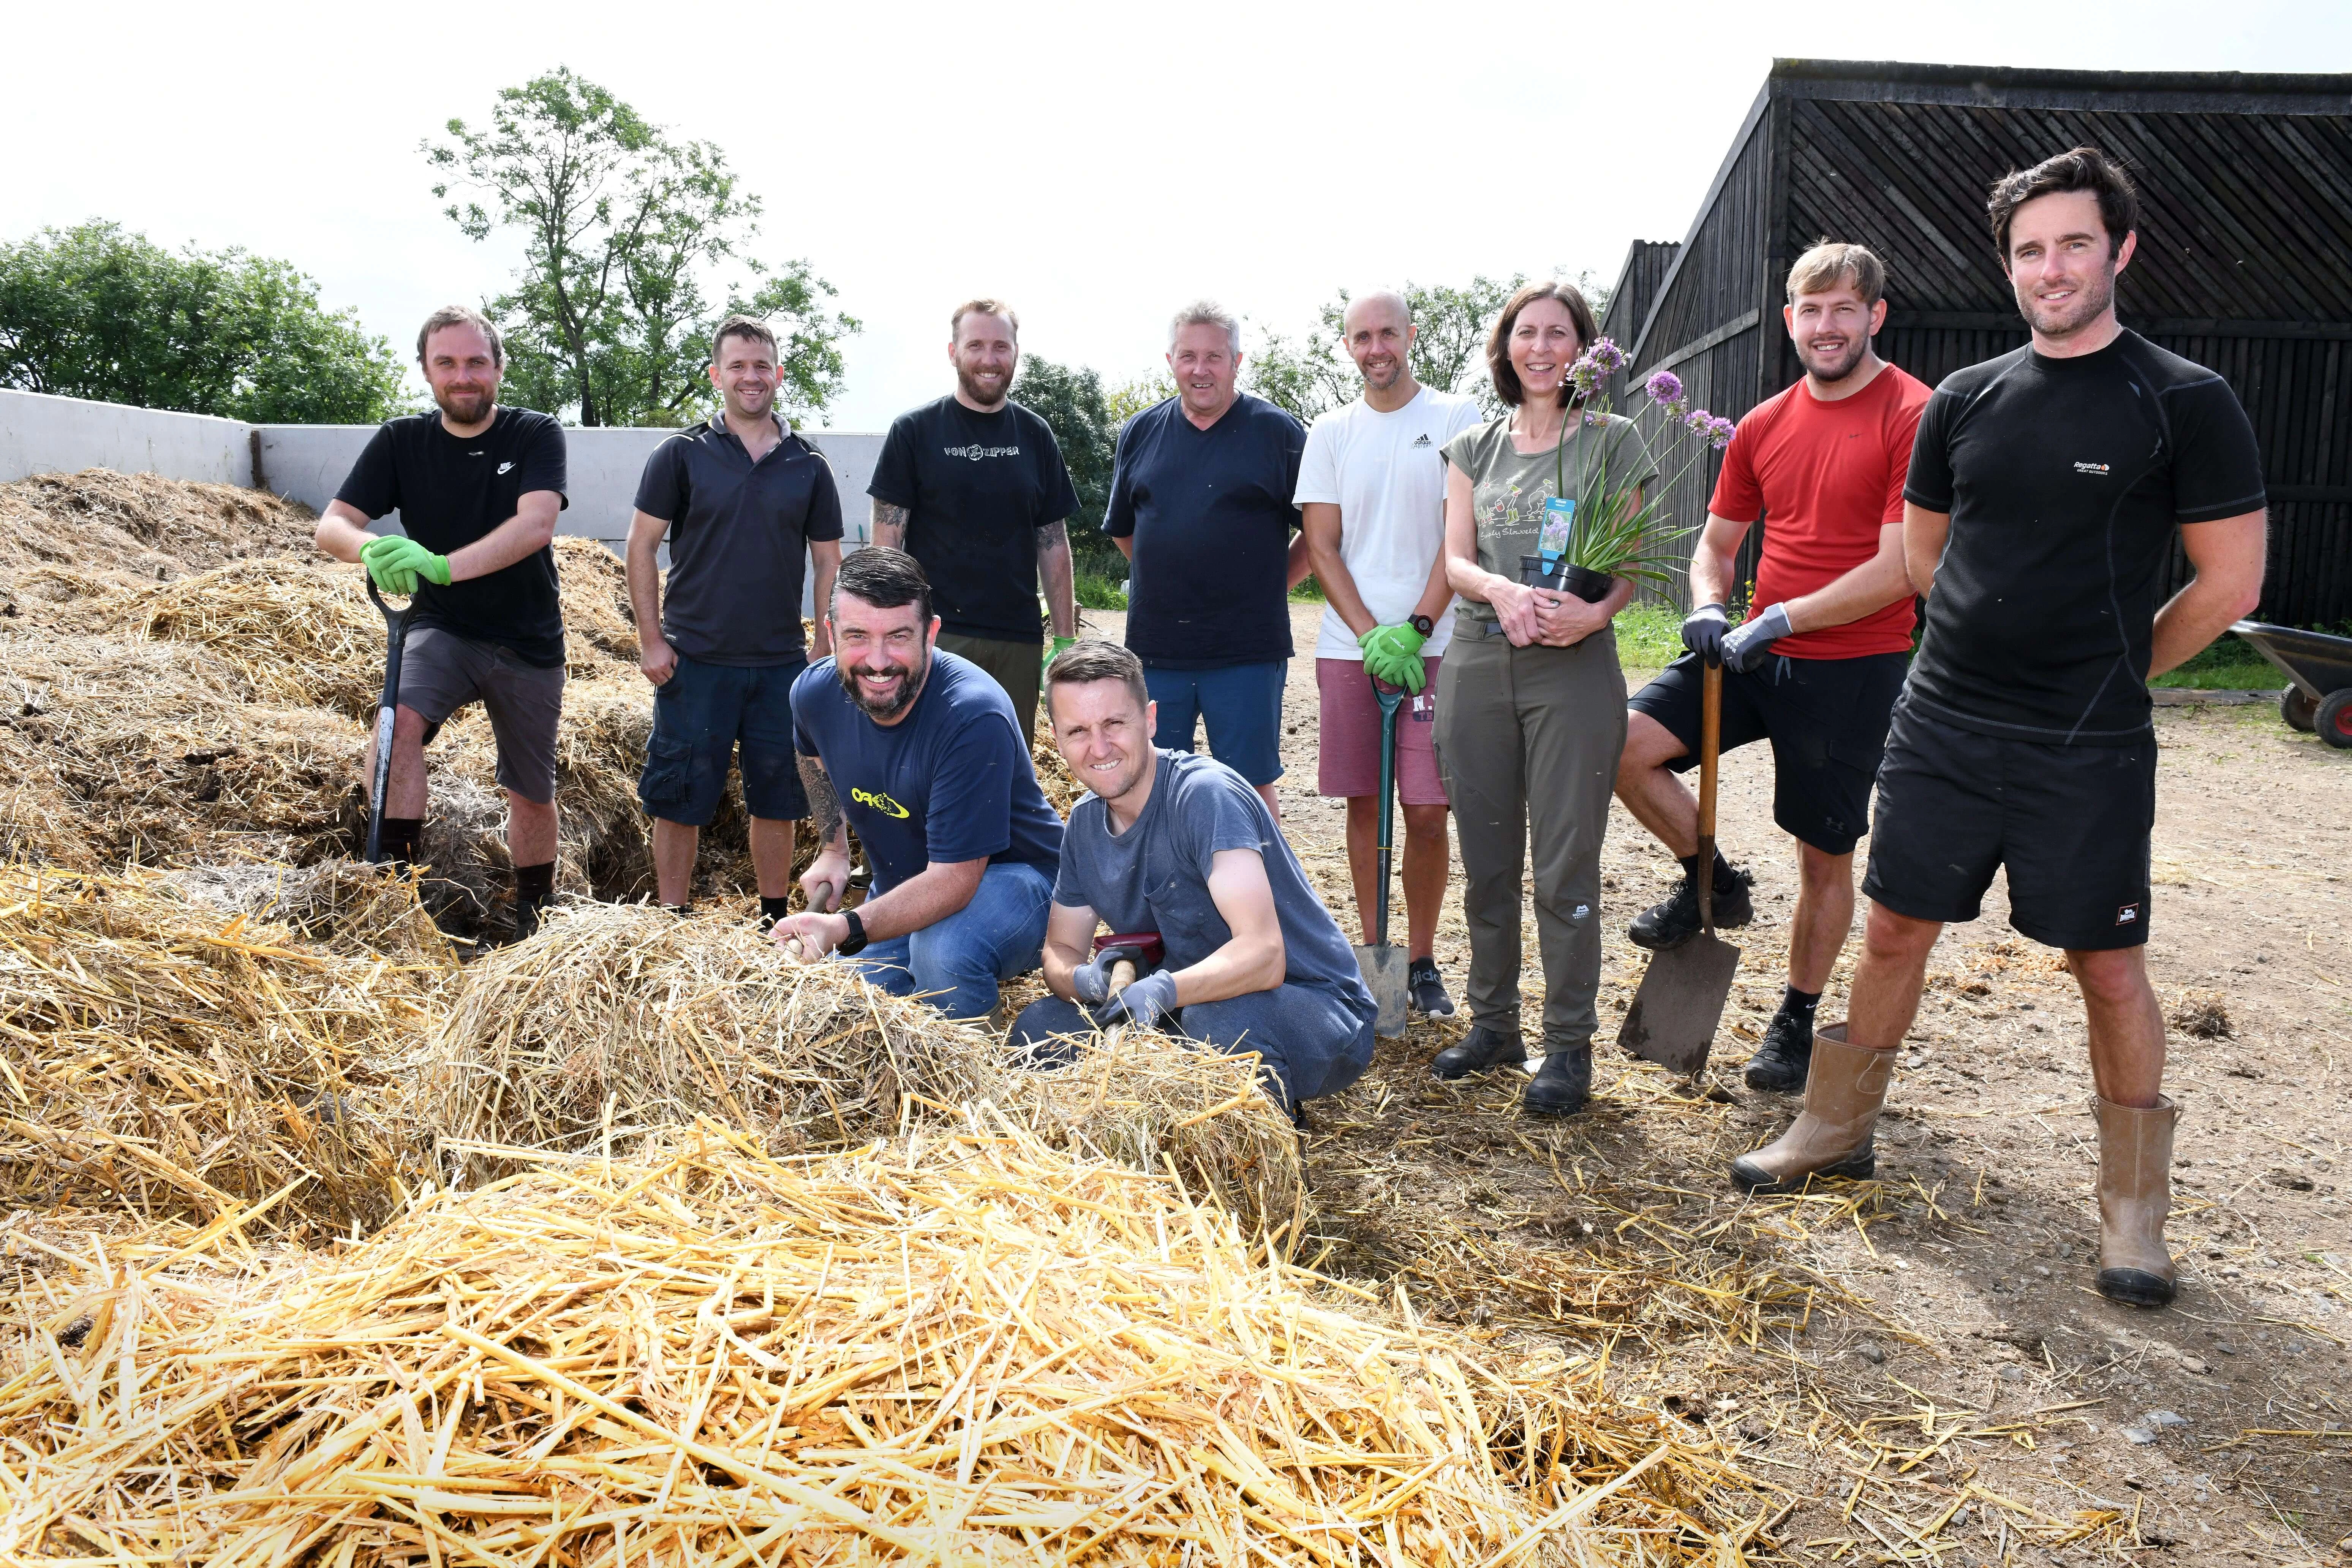 The group of 10 volunteers from Barratt Developments North East Technical team (pictured) cleared weeds, prepared garden beds and planted flowers